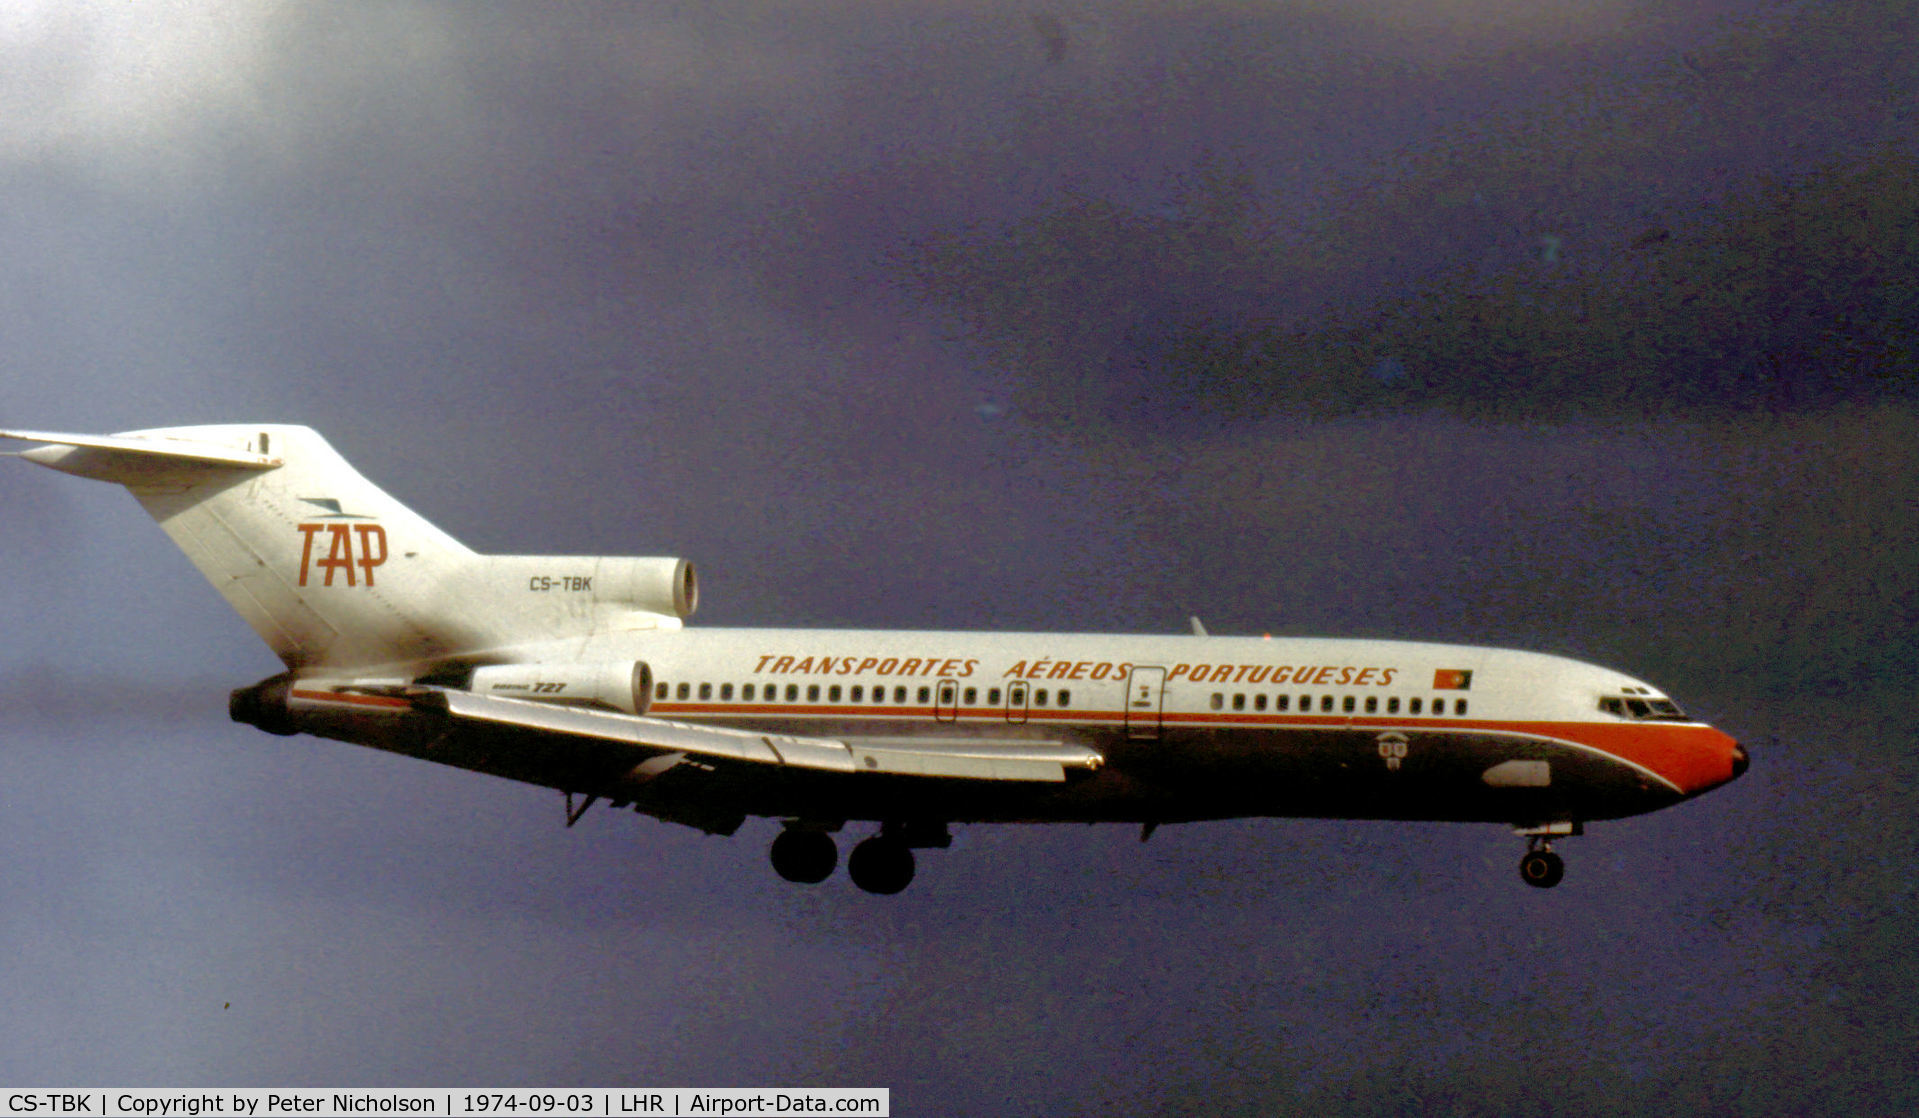 CS-TBK, 1967 Boeing 727-82 C/N 19404, Boeing 727-82 of TAP Air Portugal on approach to Heathrow in the Summer of 1974.